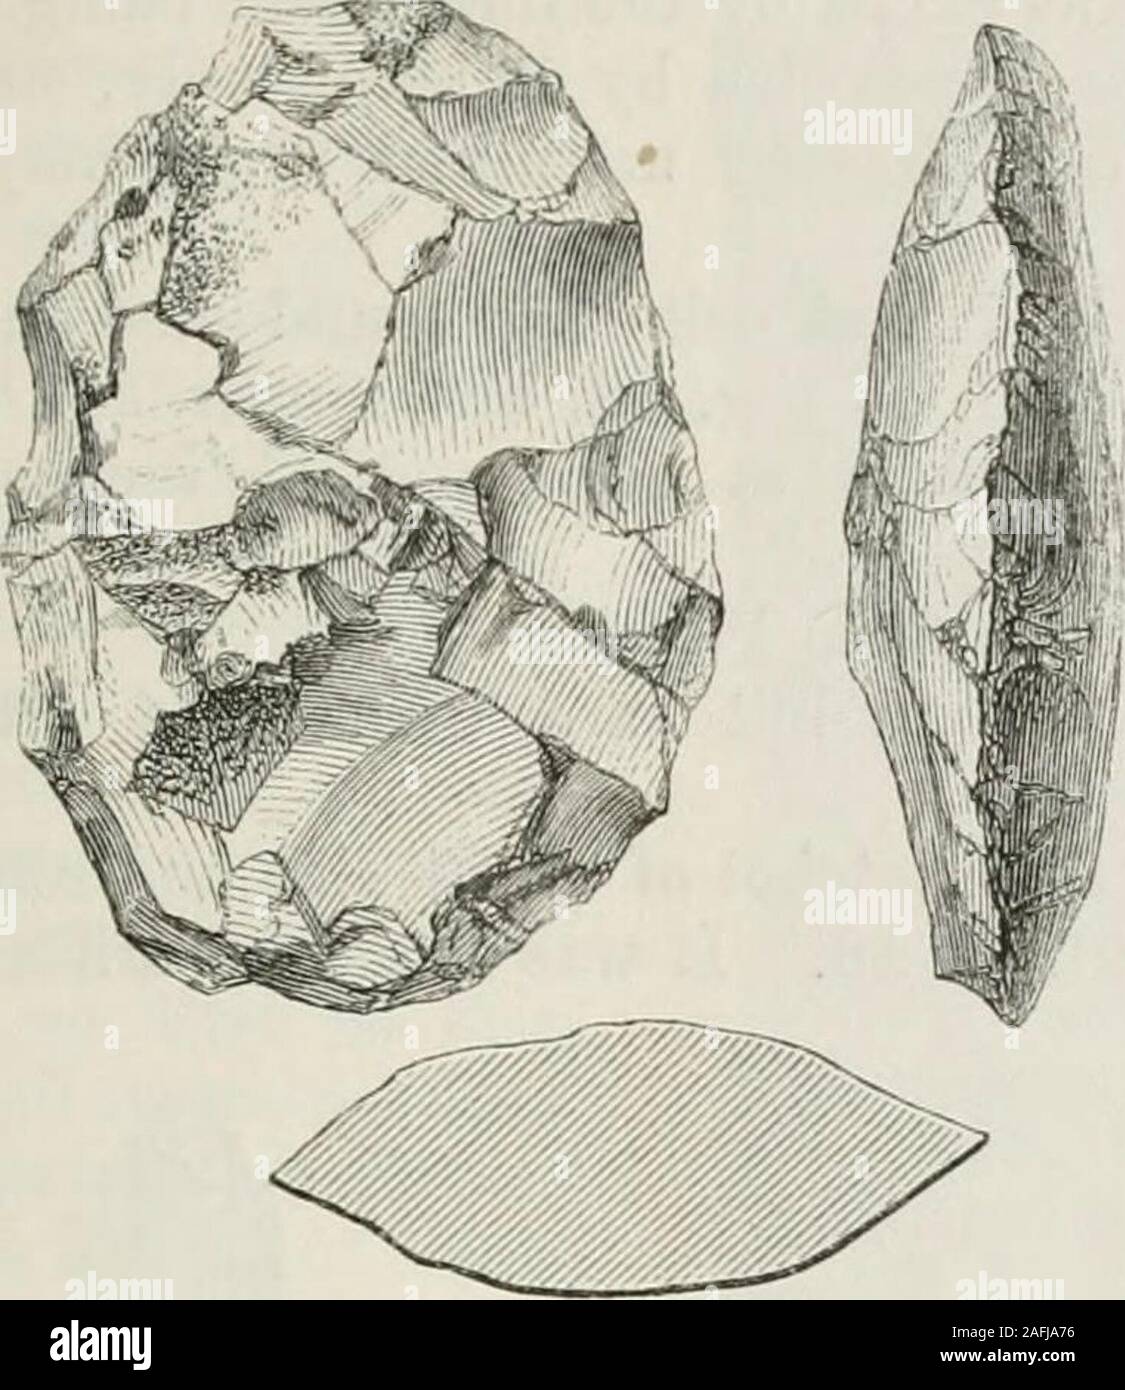 . The ancient stone implements, weapons, and ornaments, of Great Britain. 16.—Near Newhaven. ? Smithsonian Ecjjort, 1863, p. 379; 1868, p. 401. Flint Chips, 145. t xix. 53. X Journ. Eth. Soc, N. S., ii. pi. xxviii. 7. SOME CAREFULLY CHIPPEI). 65 found at Cissbury, Sussex.* Mr. C. Monkman possesses another,SJ inches long, and rather narrower in its proportions, found at. Fig. 17.—Xear Liunstable. j Bempton, Yorkshire. I have some implements of much the same shape,though larger, from some of theancient flint-implement manufac-tories of Belgium. The next specimen (Fig. 18)which I have engraved is Stock Photo